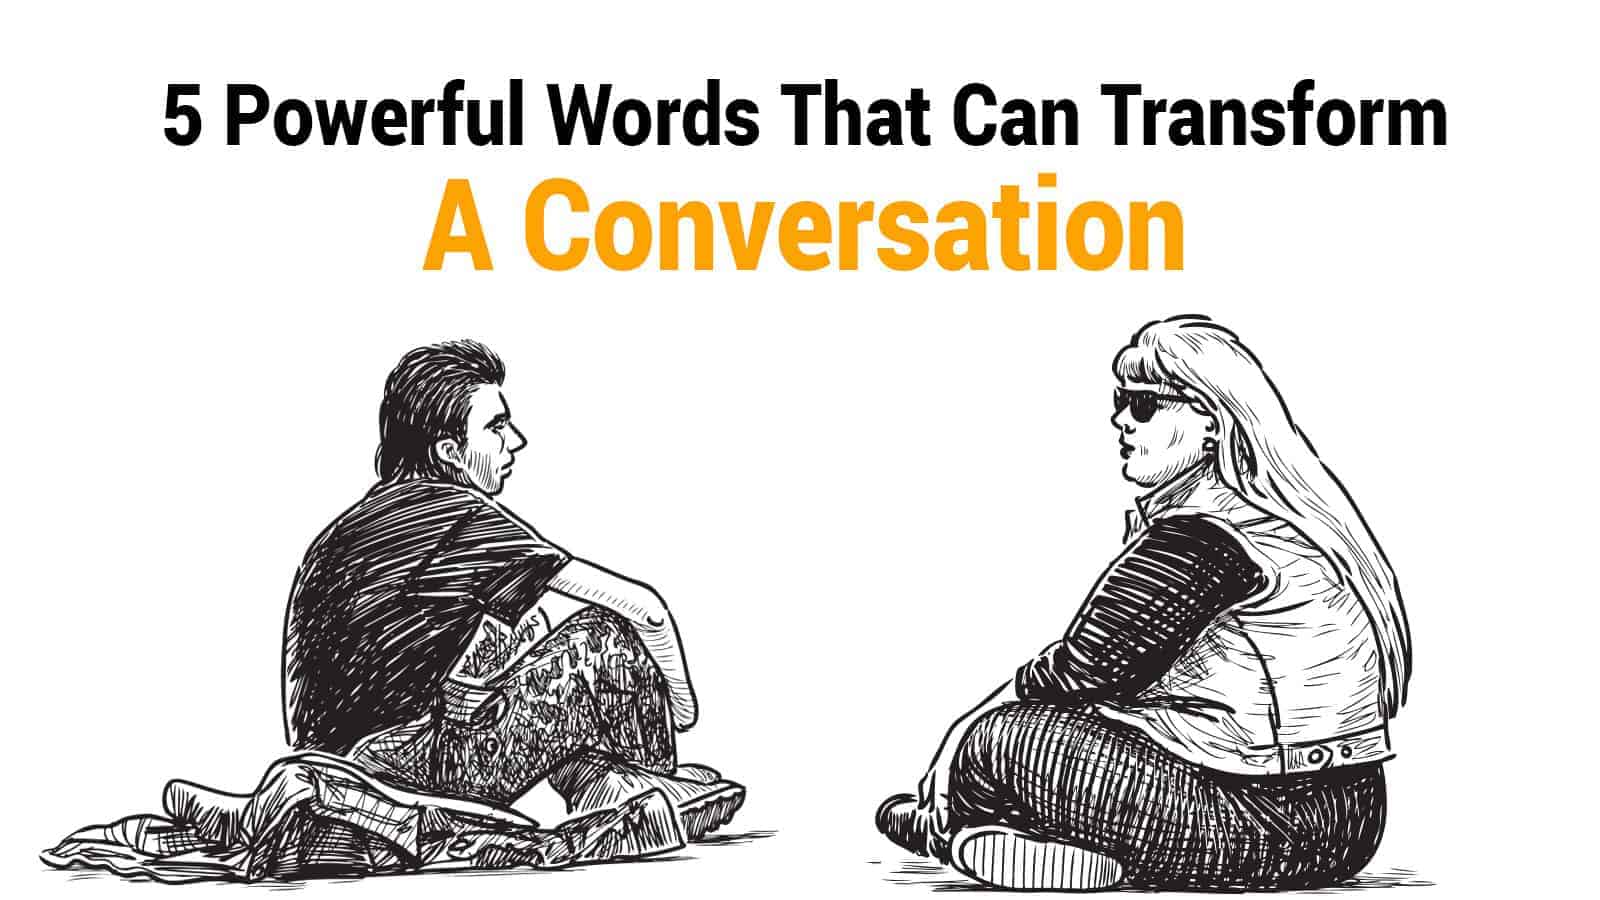 5 Powerful Words That Can Transform A Conversation